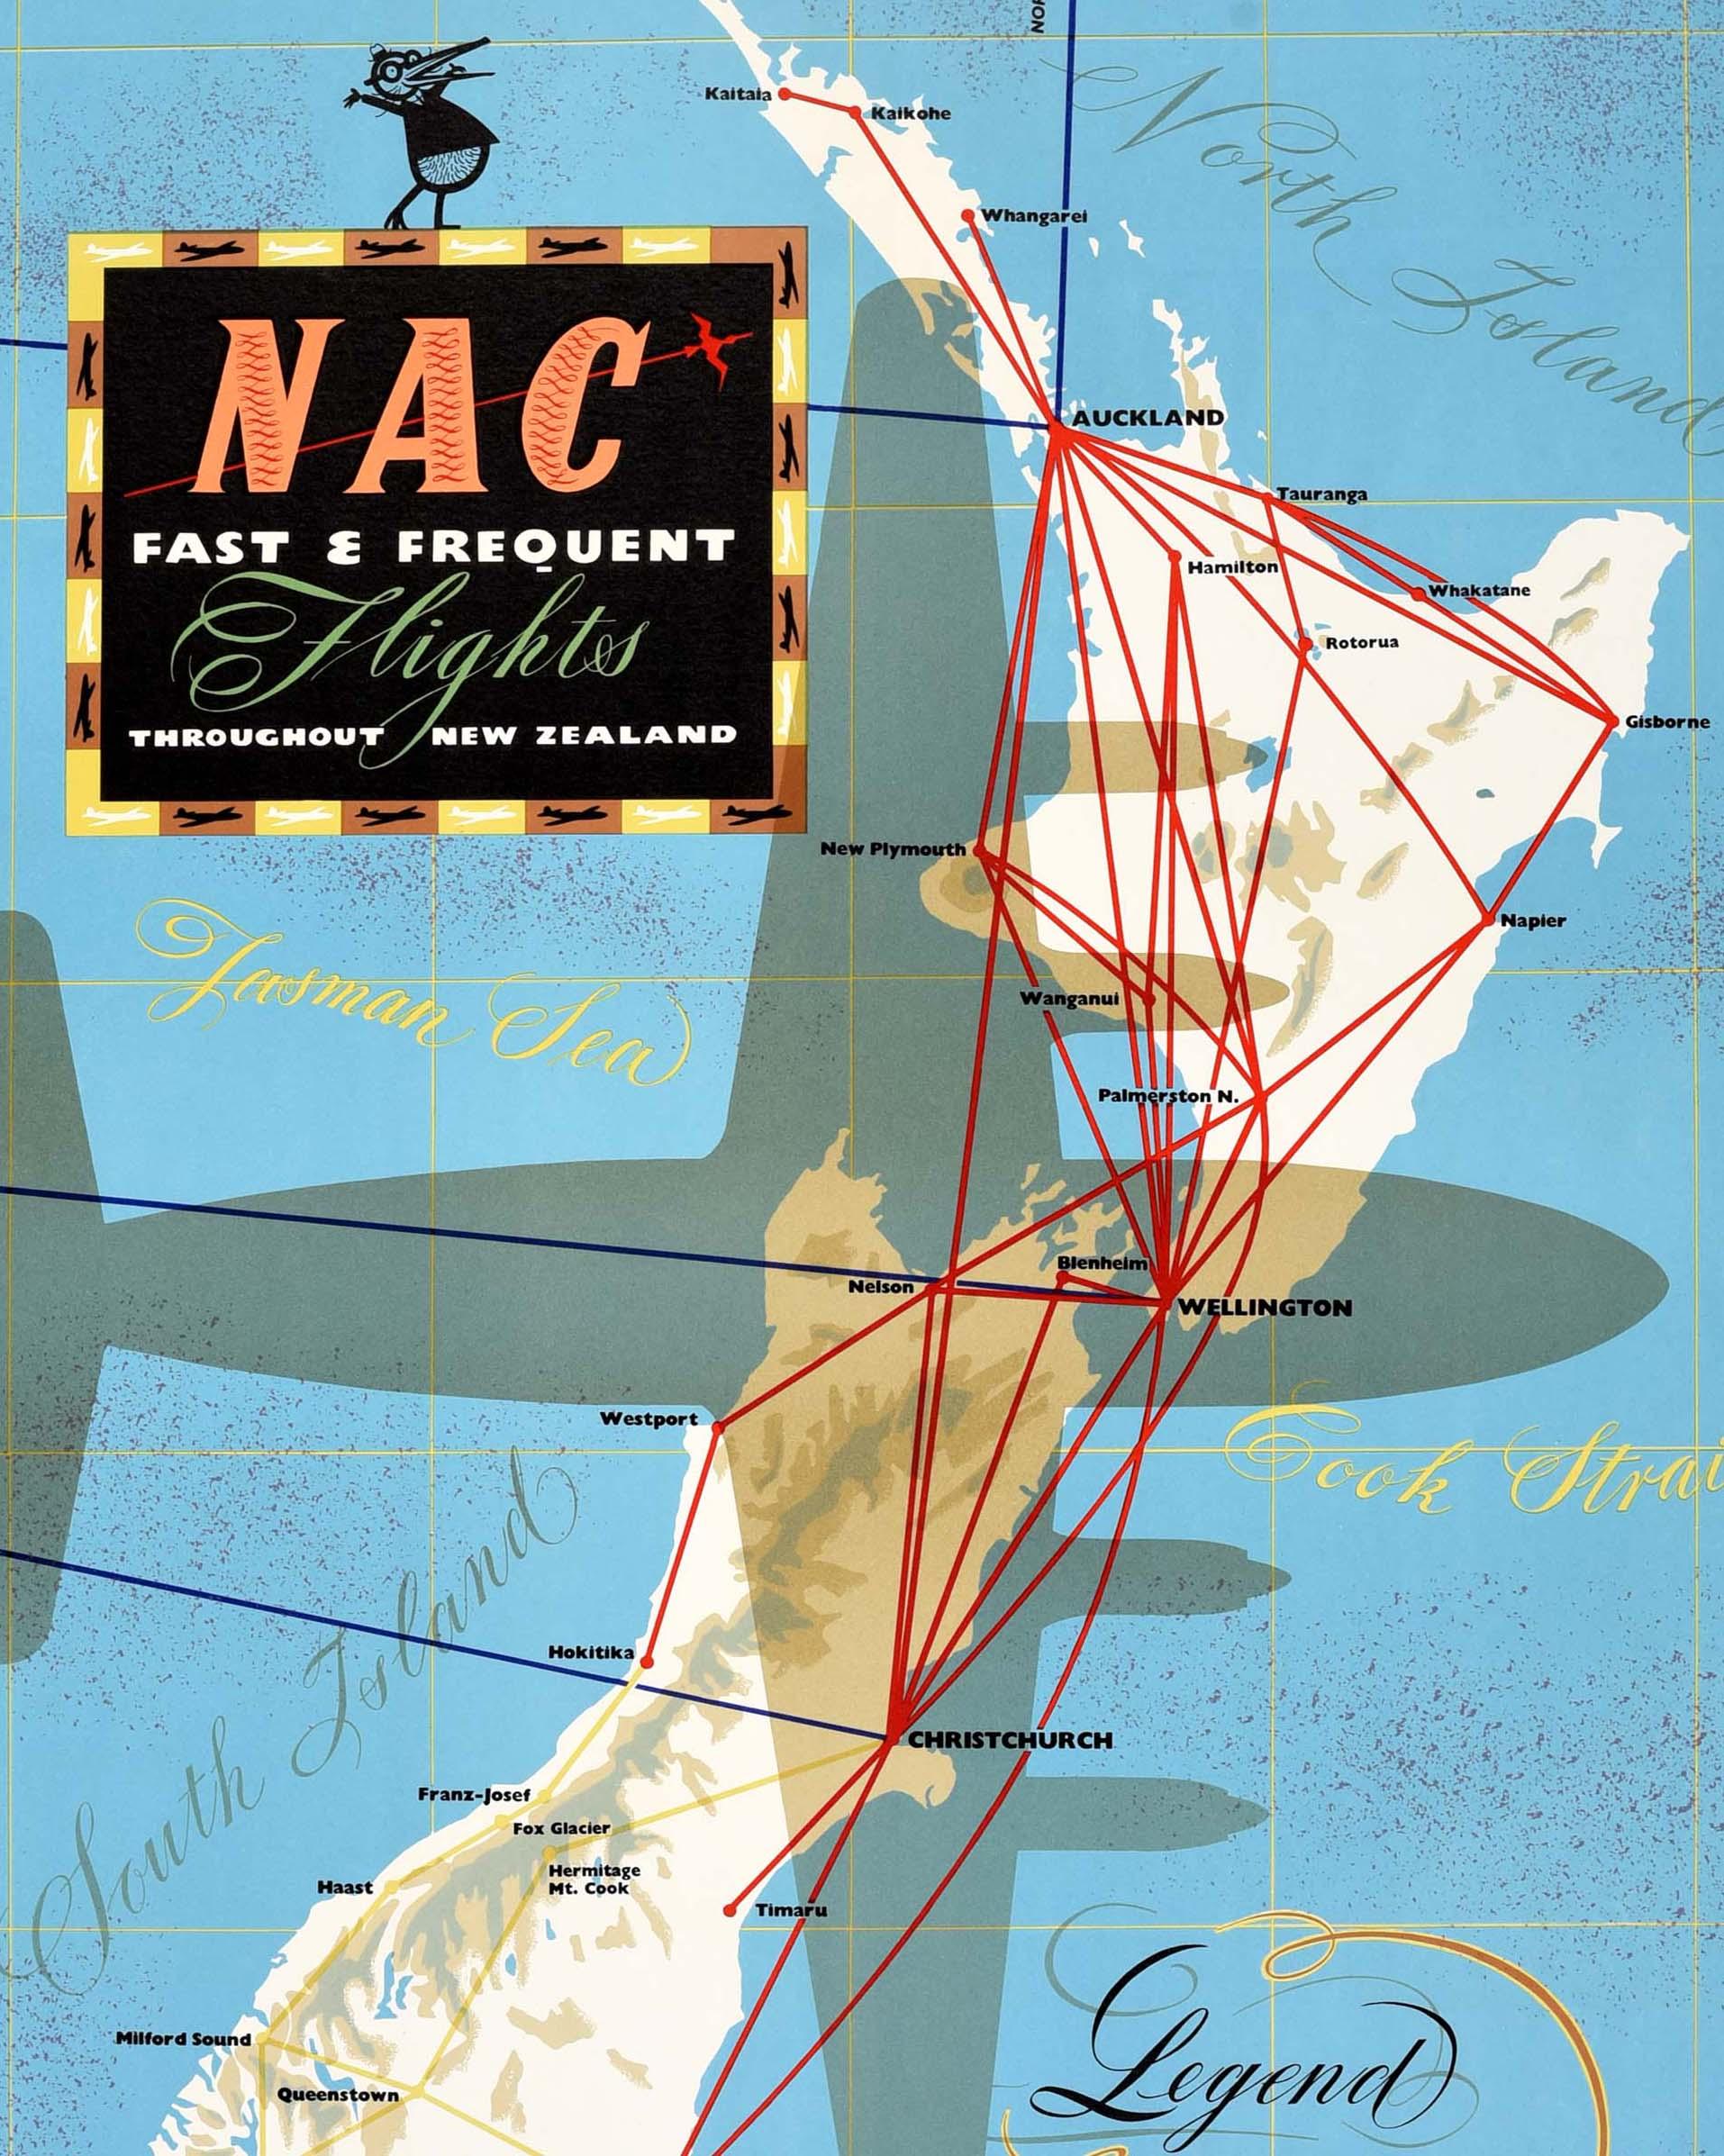 Original vintage travel advertising poster for New Zealand National Airways Corporation Flying's the way to travel - NAC Fast & Frequent Flights Throughout New Zealand - featuring the shadow of a plane over a route map of New Zealand marking the